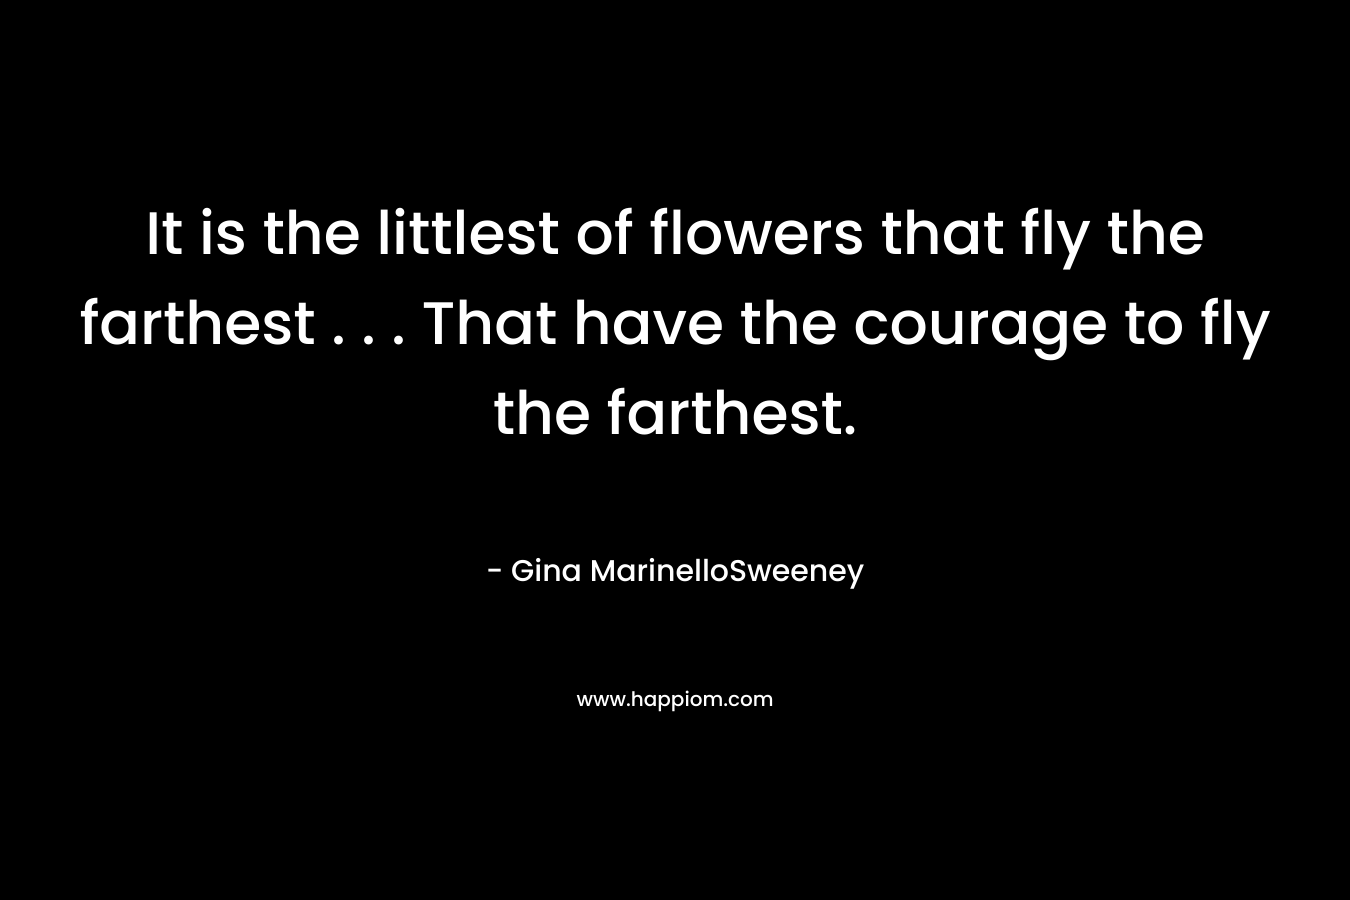 It is the littlest of flowers that fly the farthest . . . That have the courage to fly the farthest. – Gina MarinelloSweeney